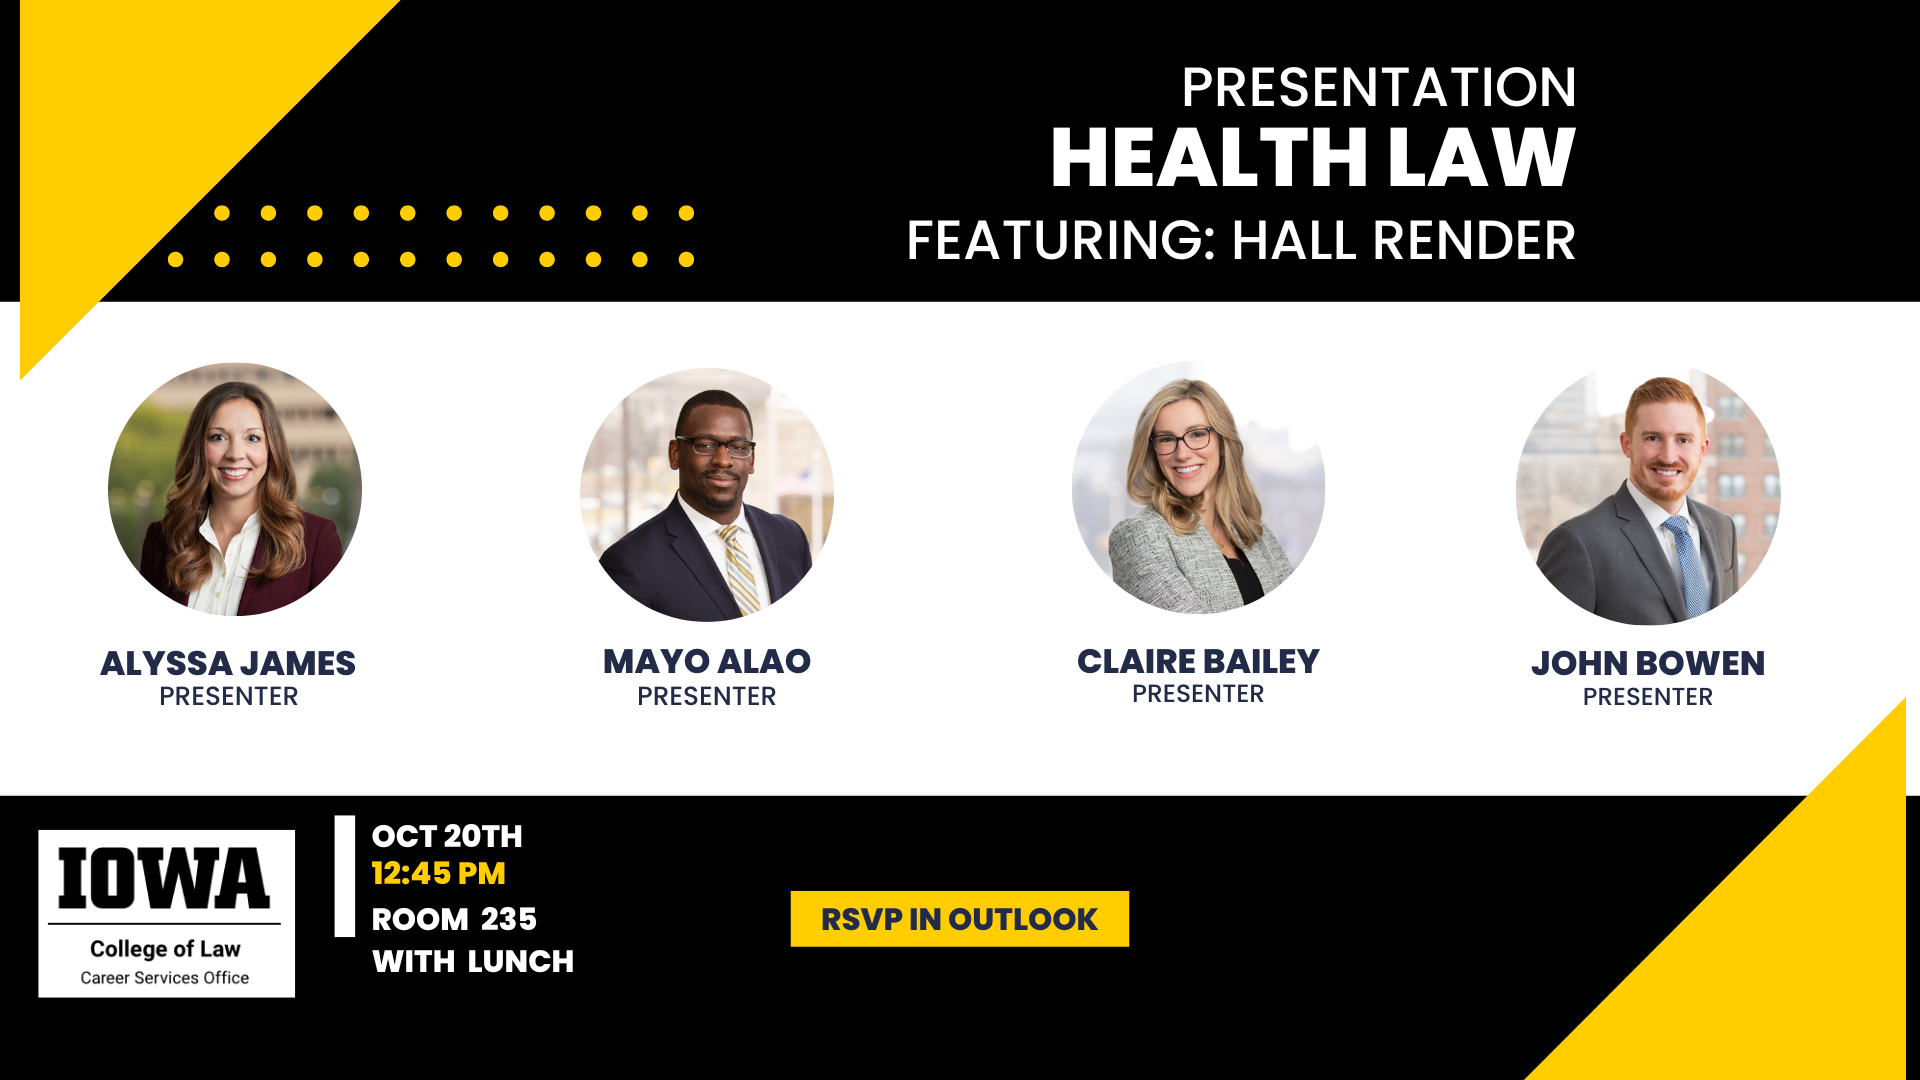 Presentation    Health Law    Featuring: Hall Render    Alyssa James, Presenter    Mayo Alao, Presenter    Claire Bailey, Presenter    John Bowen, Presenter    Iowa College of Law, Career Services Office    Oct 20th 12:45 pm, Room 235 with Lunch    RSVP in Outlook